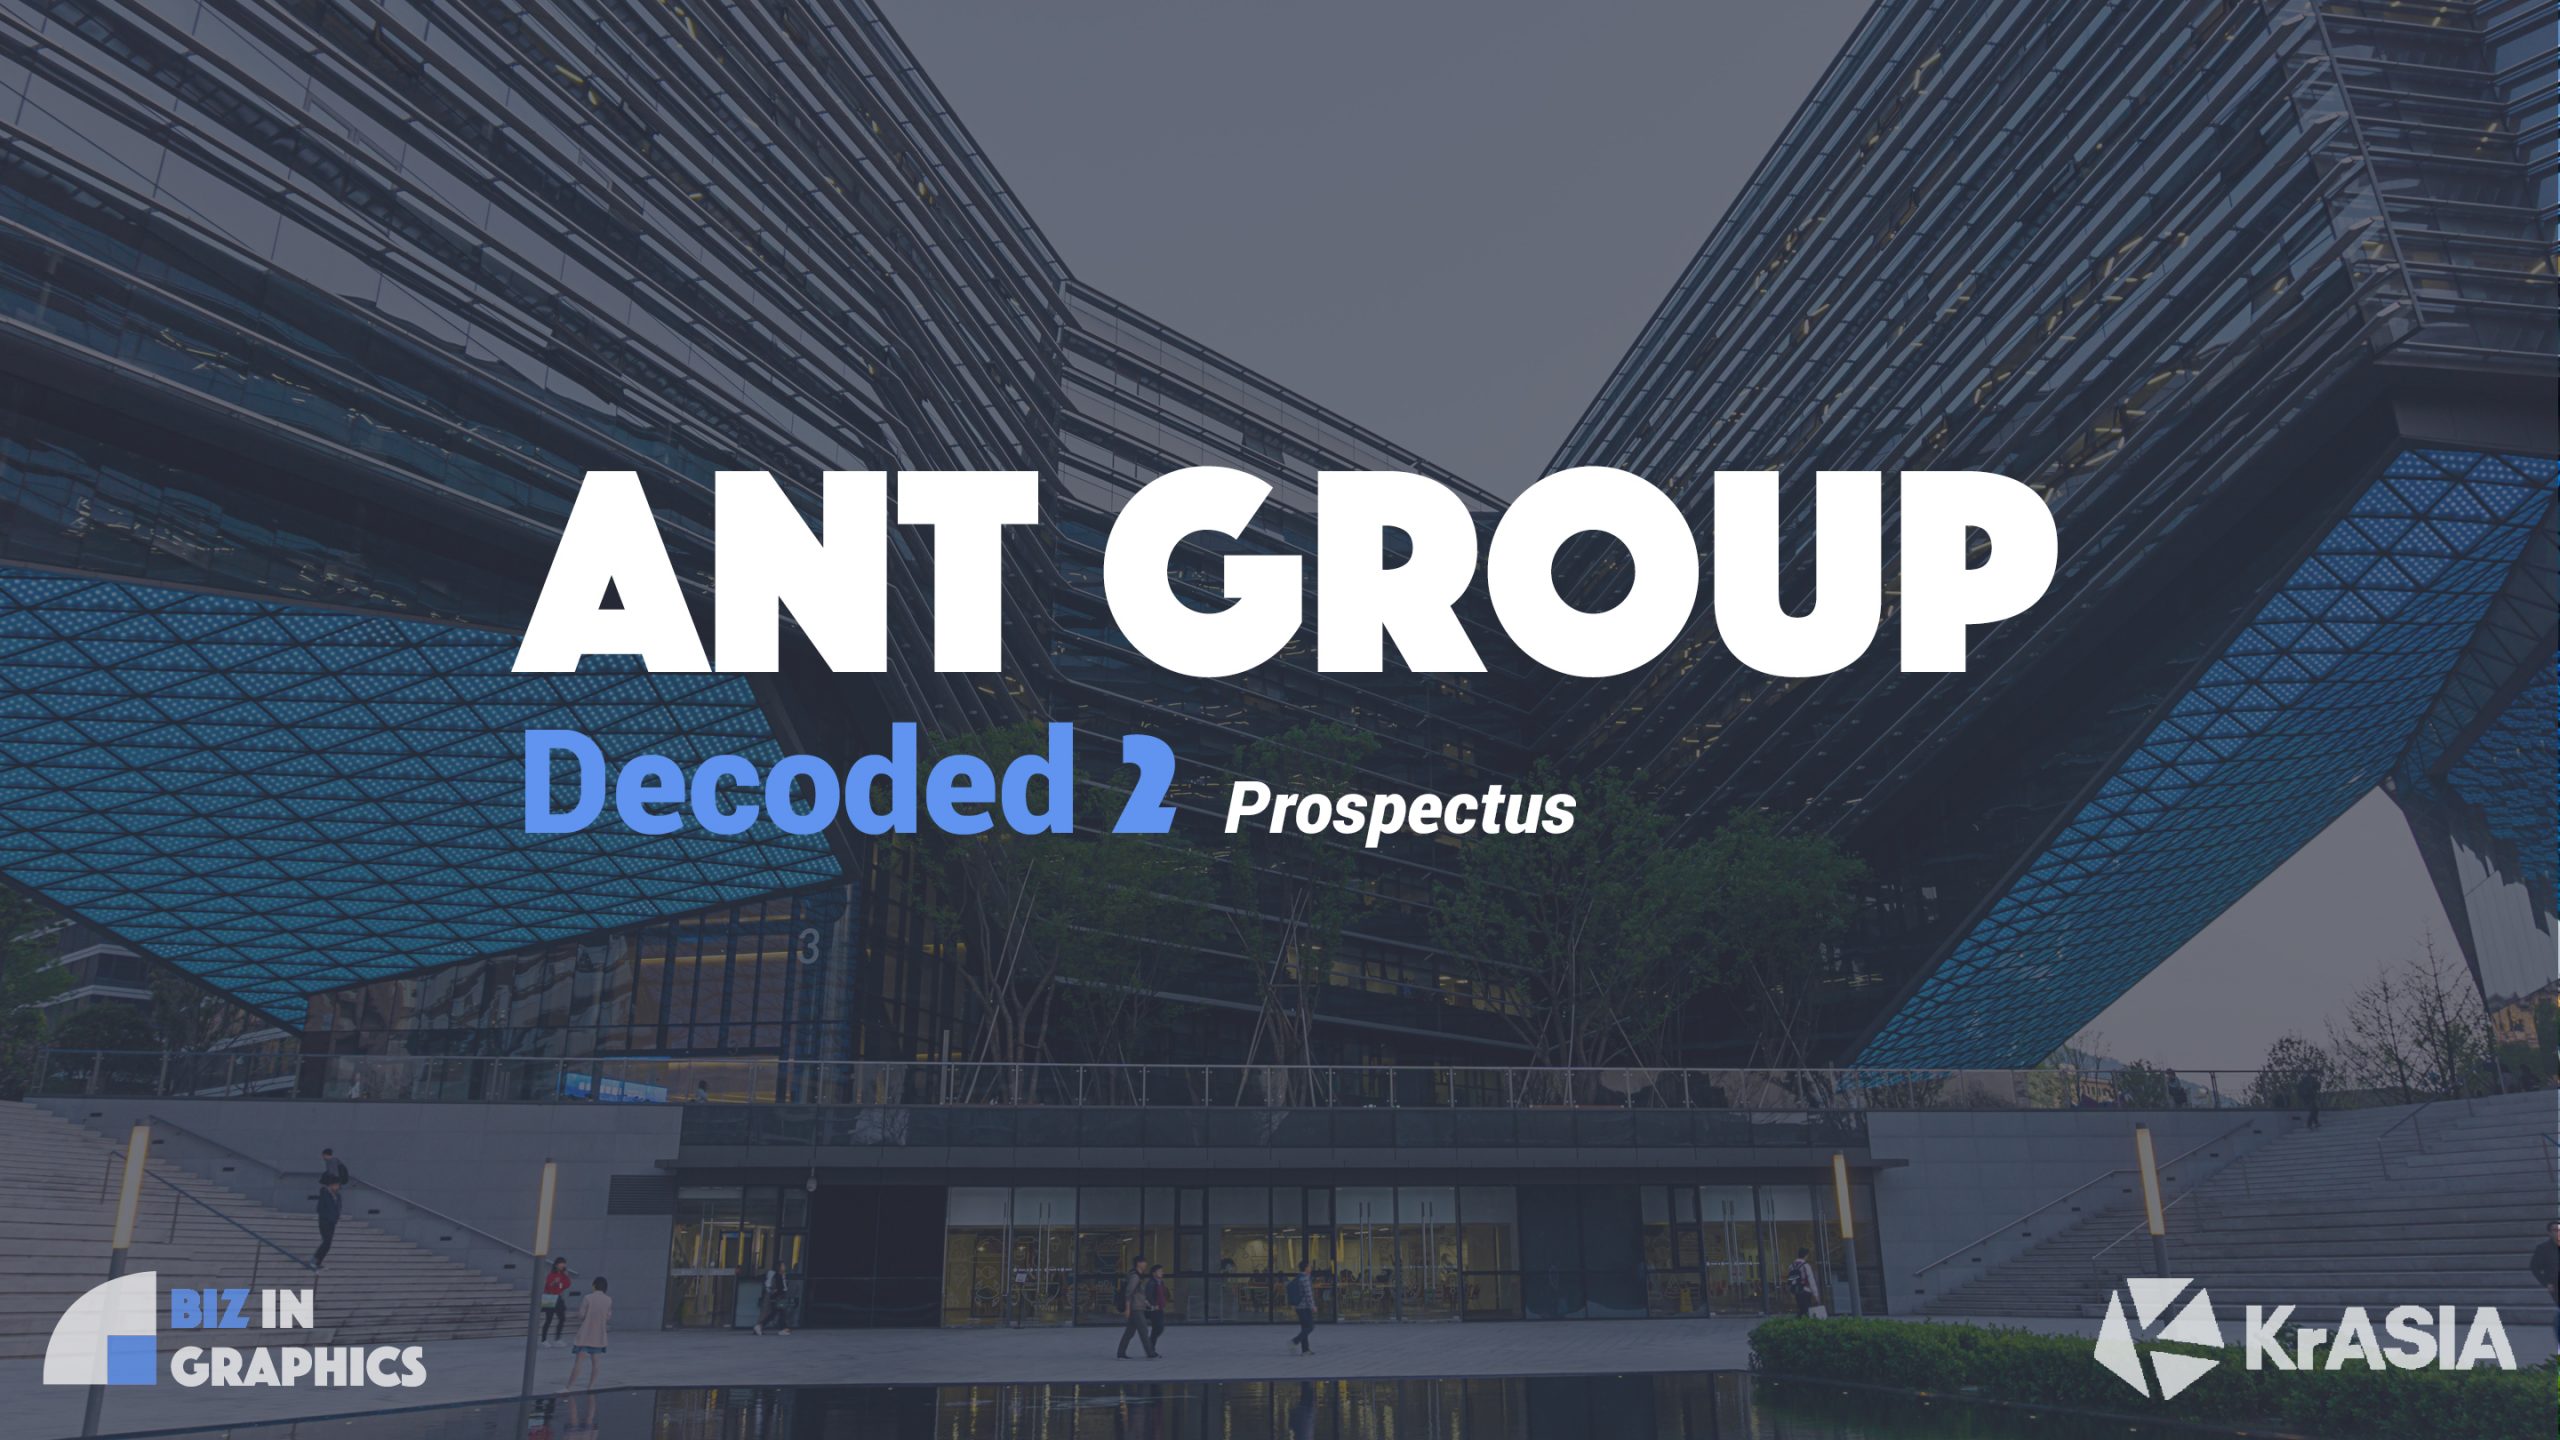 BIZ IN GRAPHICS | Ant Group to launch what could be the world’s biggest IPO soon